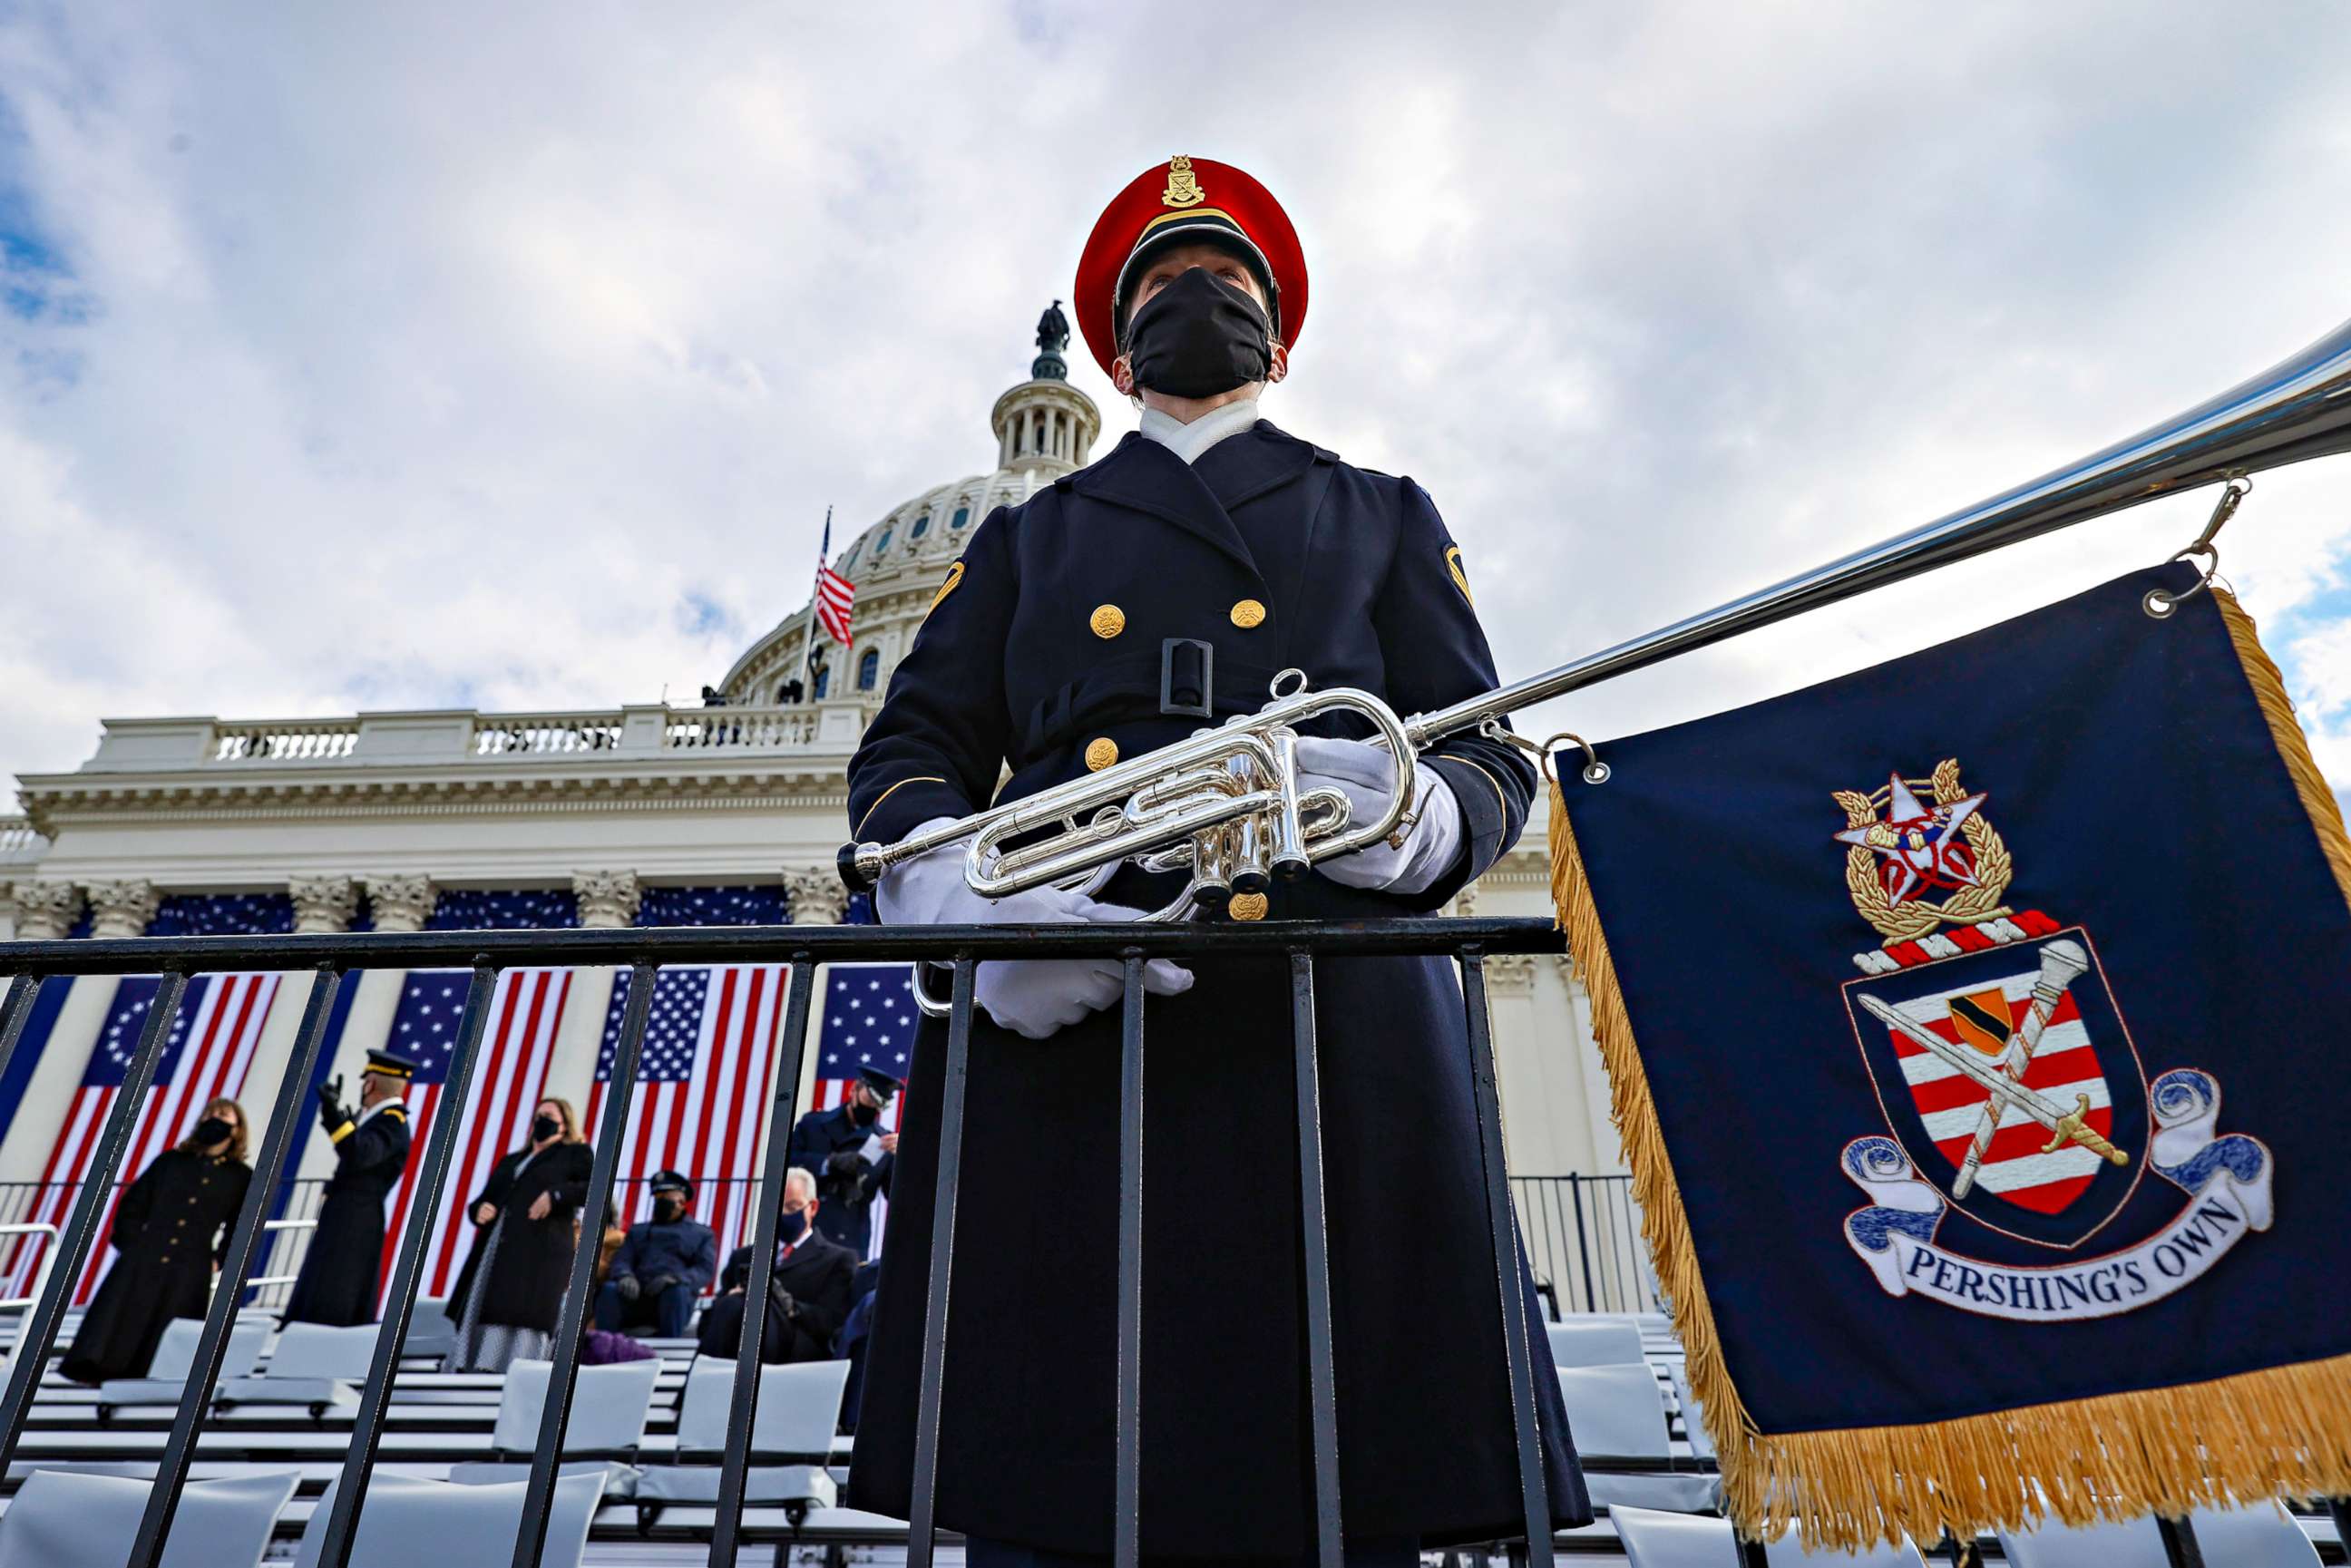 PHOTO: A member of the U.S. Army Band "Pershing's Own" looks on ahead of the inauguration of President-elect Joe Biden on the West Front of the U.S. Capitol on Jan/ 20, 2021, in Washington.